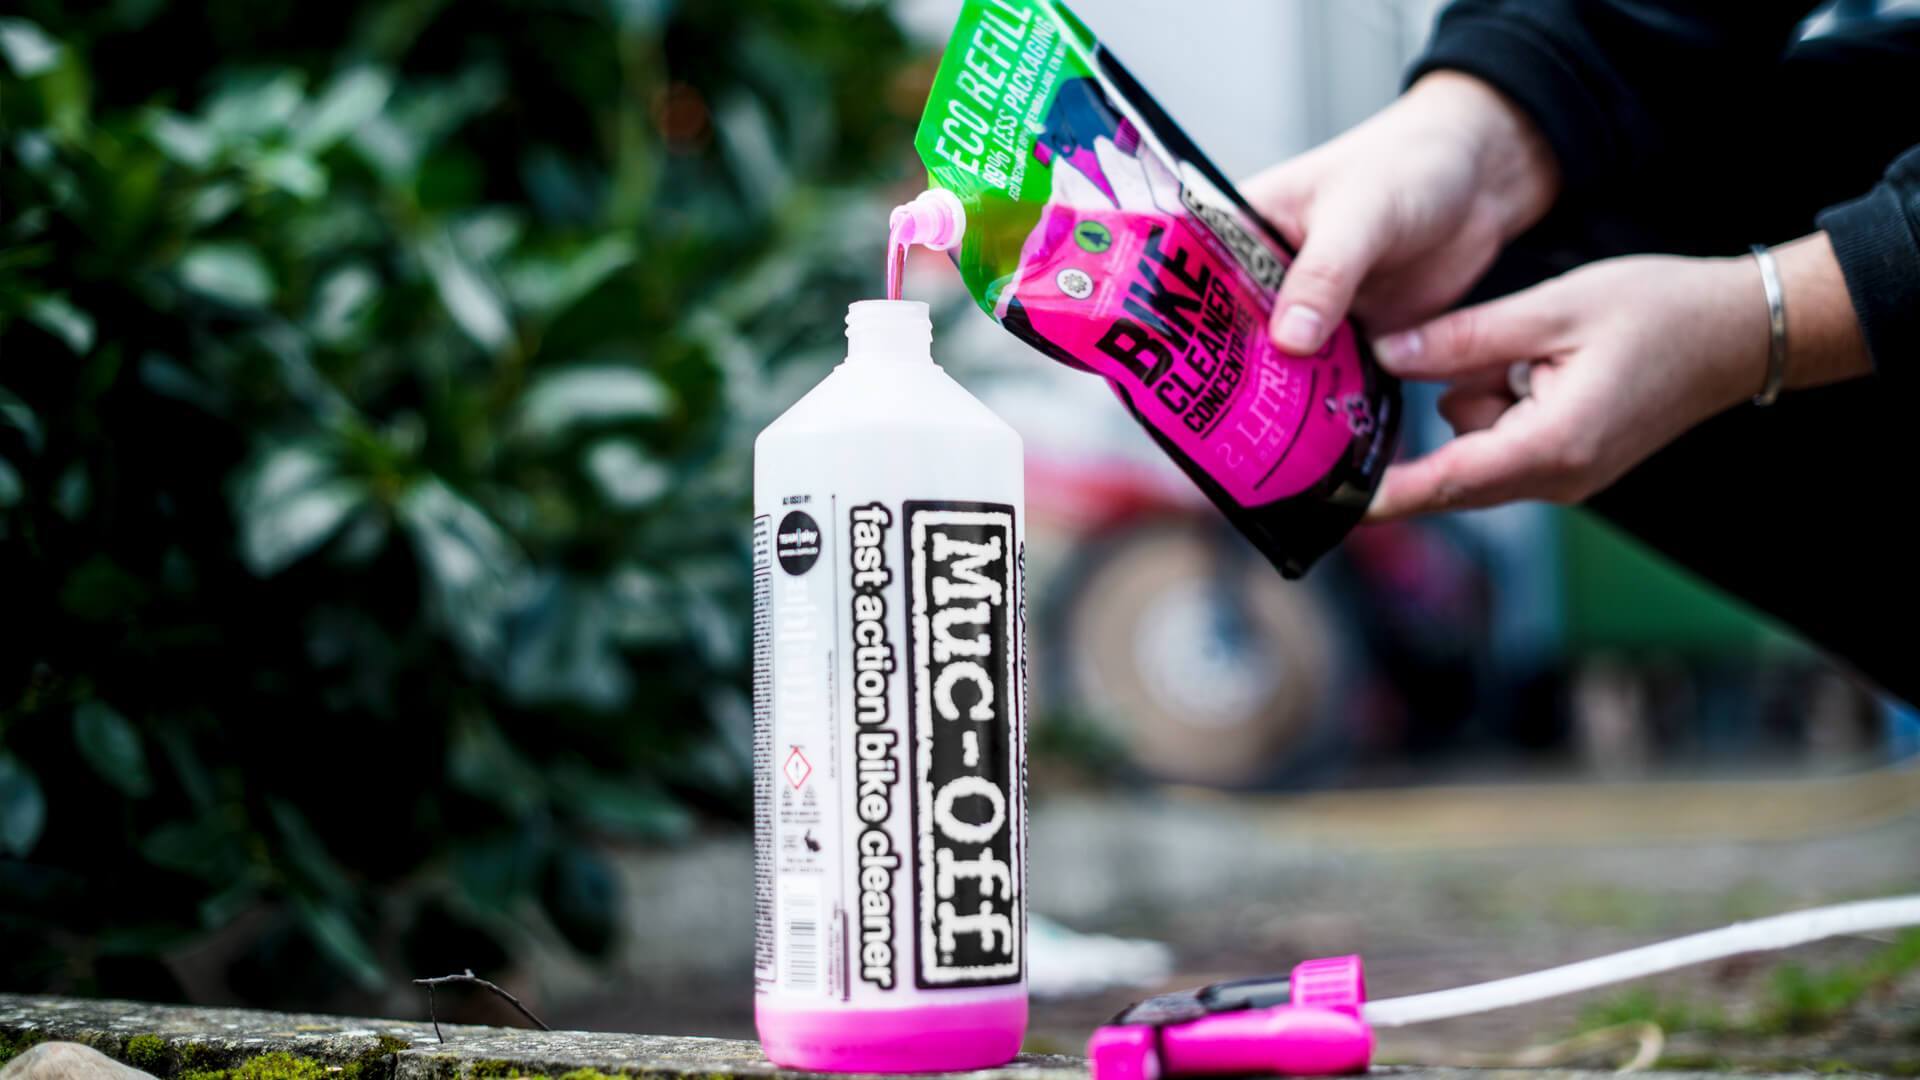 MUC-OFF MOTORCYCLE CLEANER 5 LT